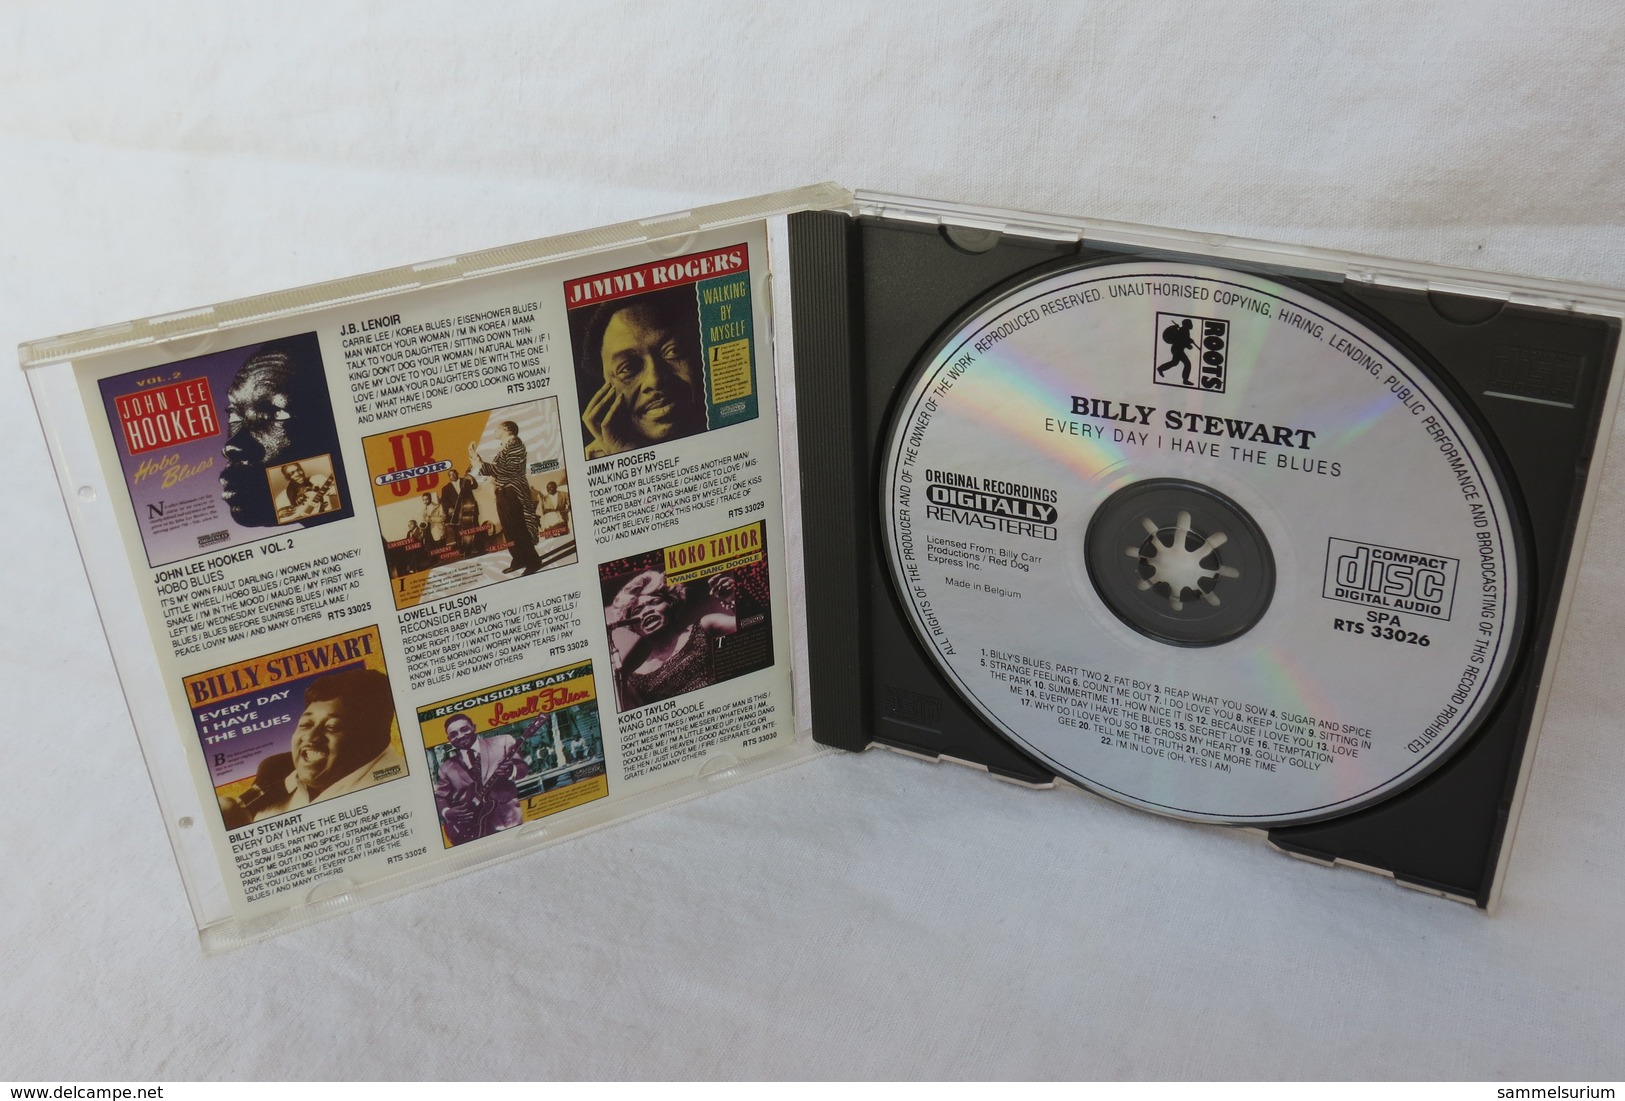 CD "Billy Stewart" Every Day I Have The Blues - Blues